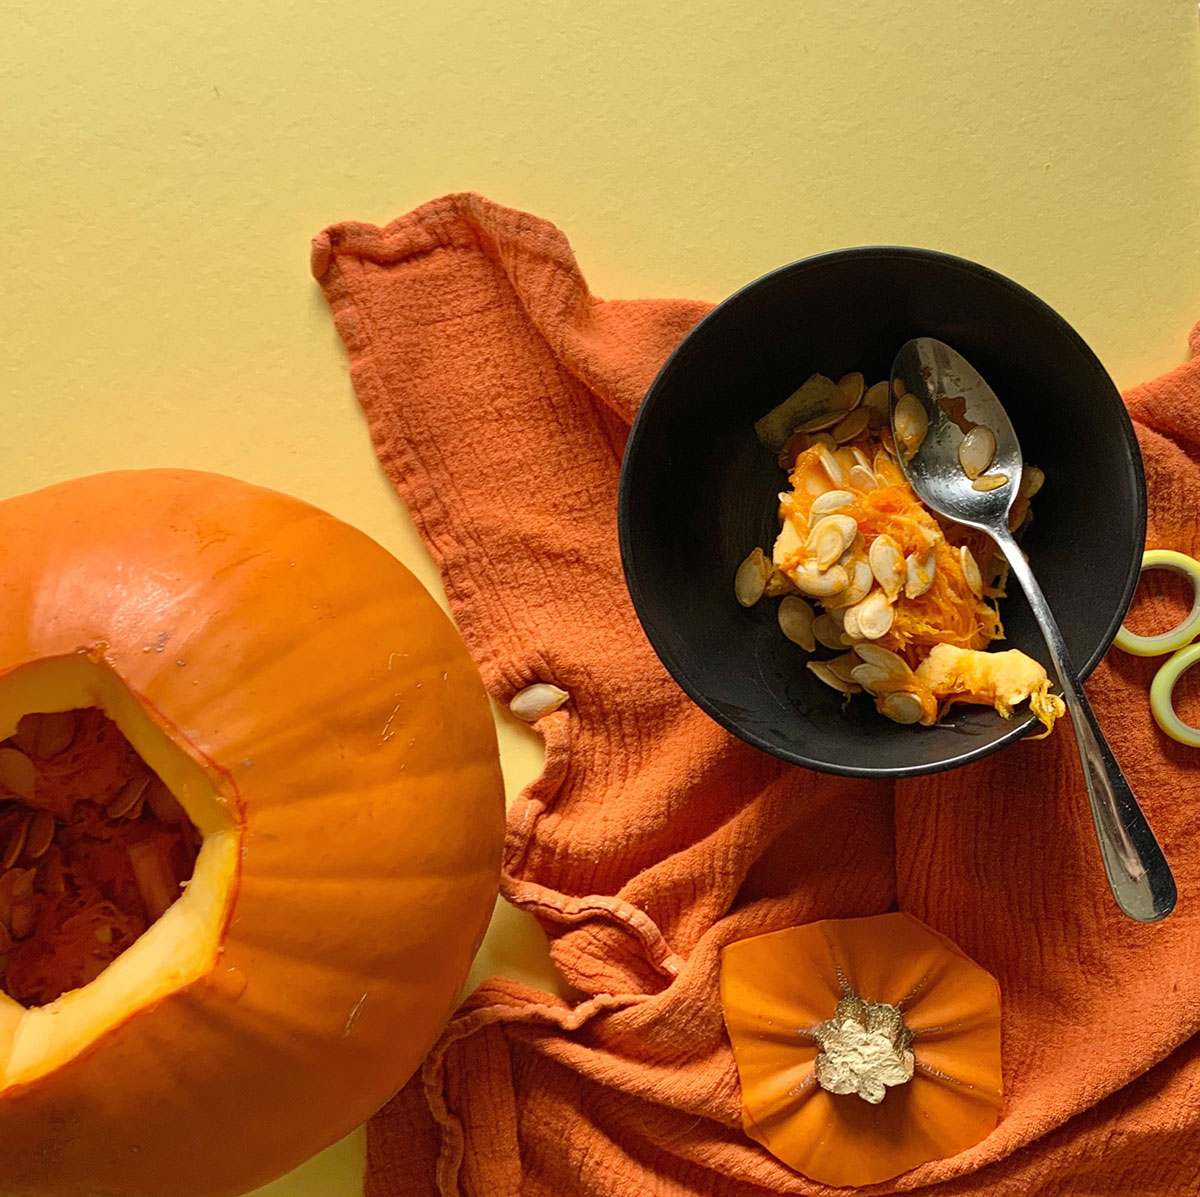 A photo of a pumpkin have it's inner contents scooped out using a spoon